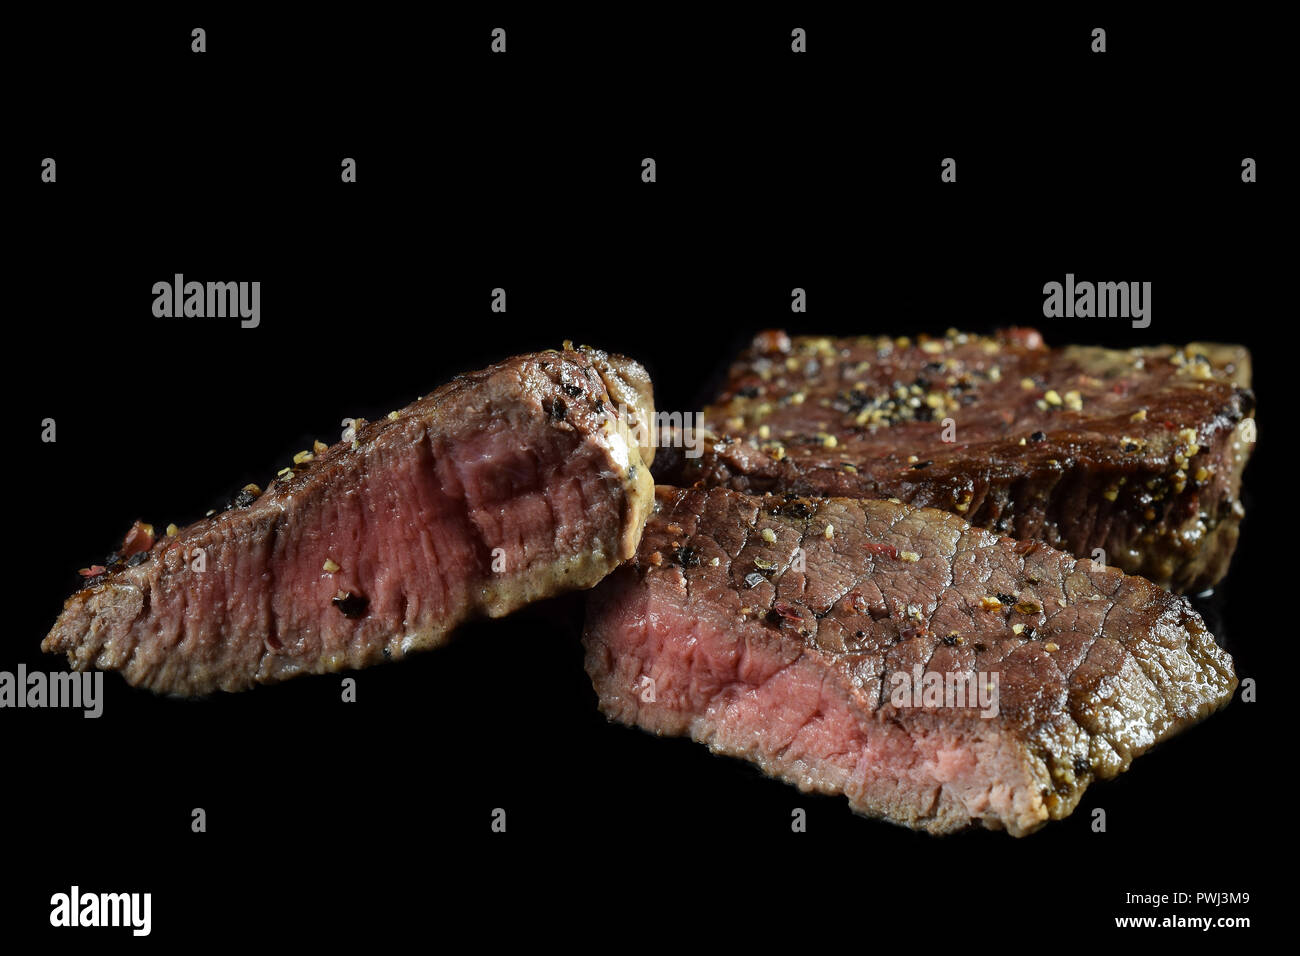 Medium rare beef steak. Spiced with peppercorns. Isolated on black. Copy space. Stock Photo